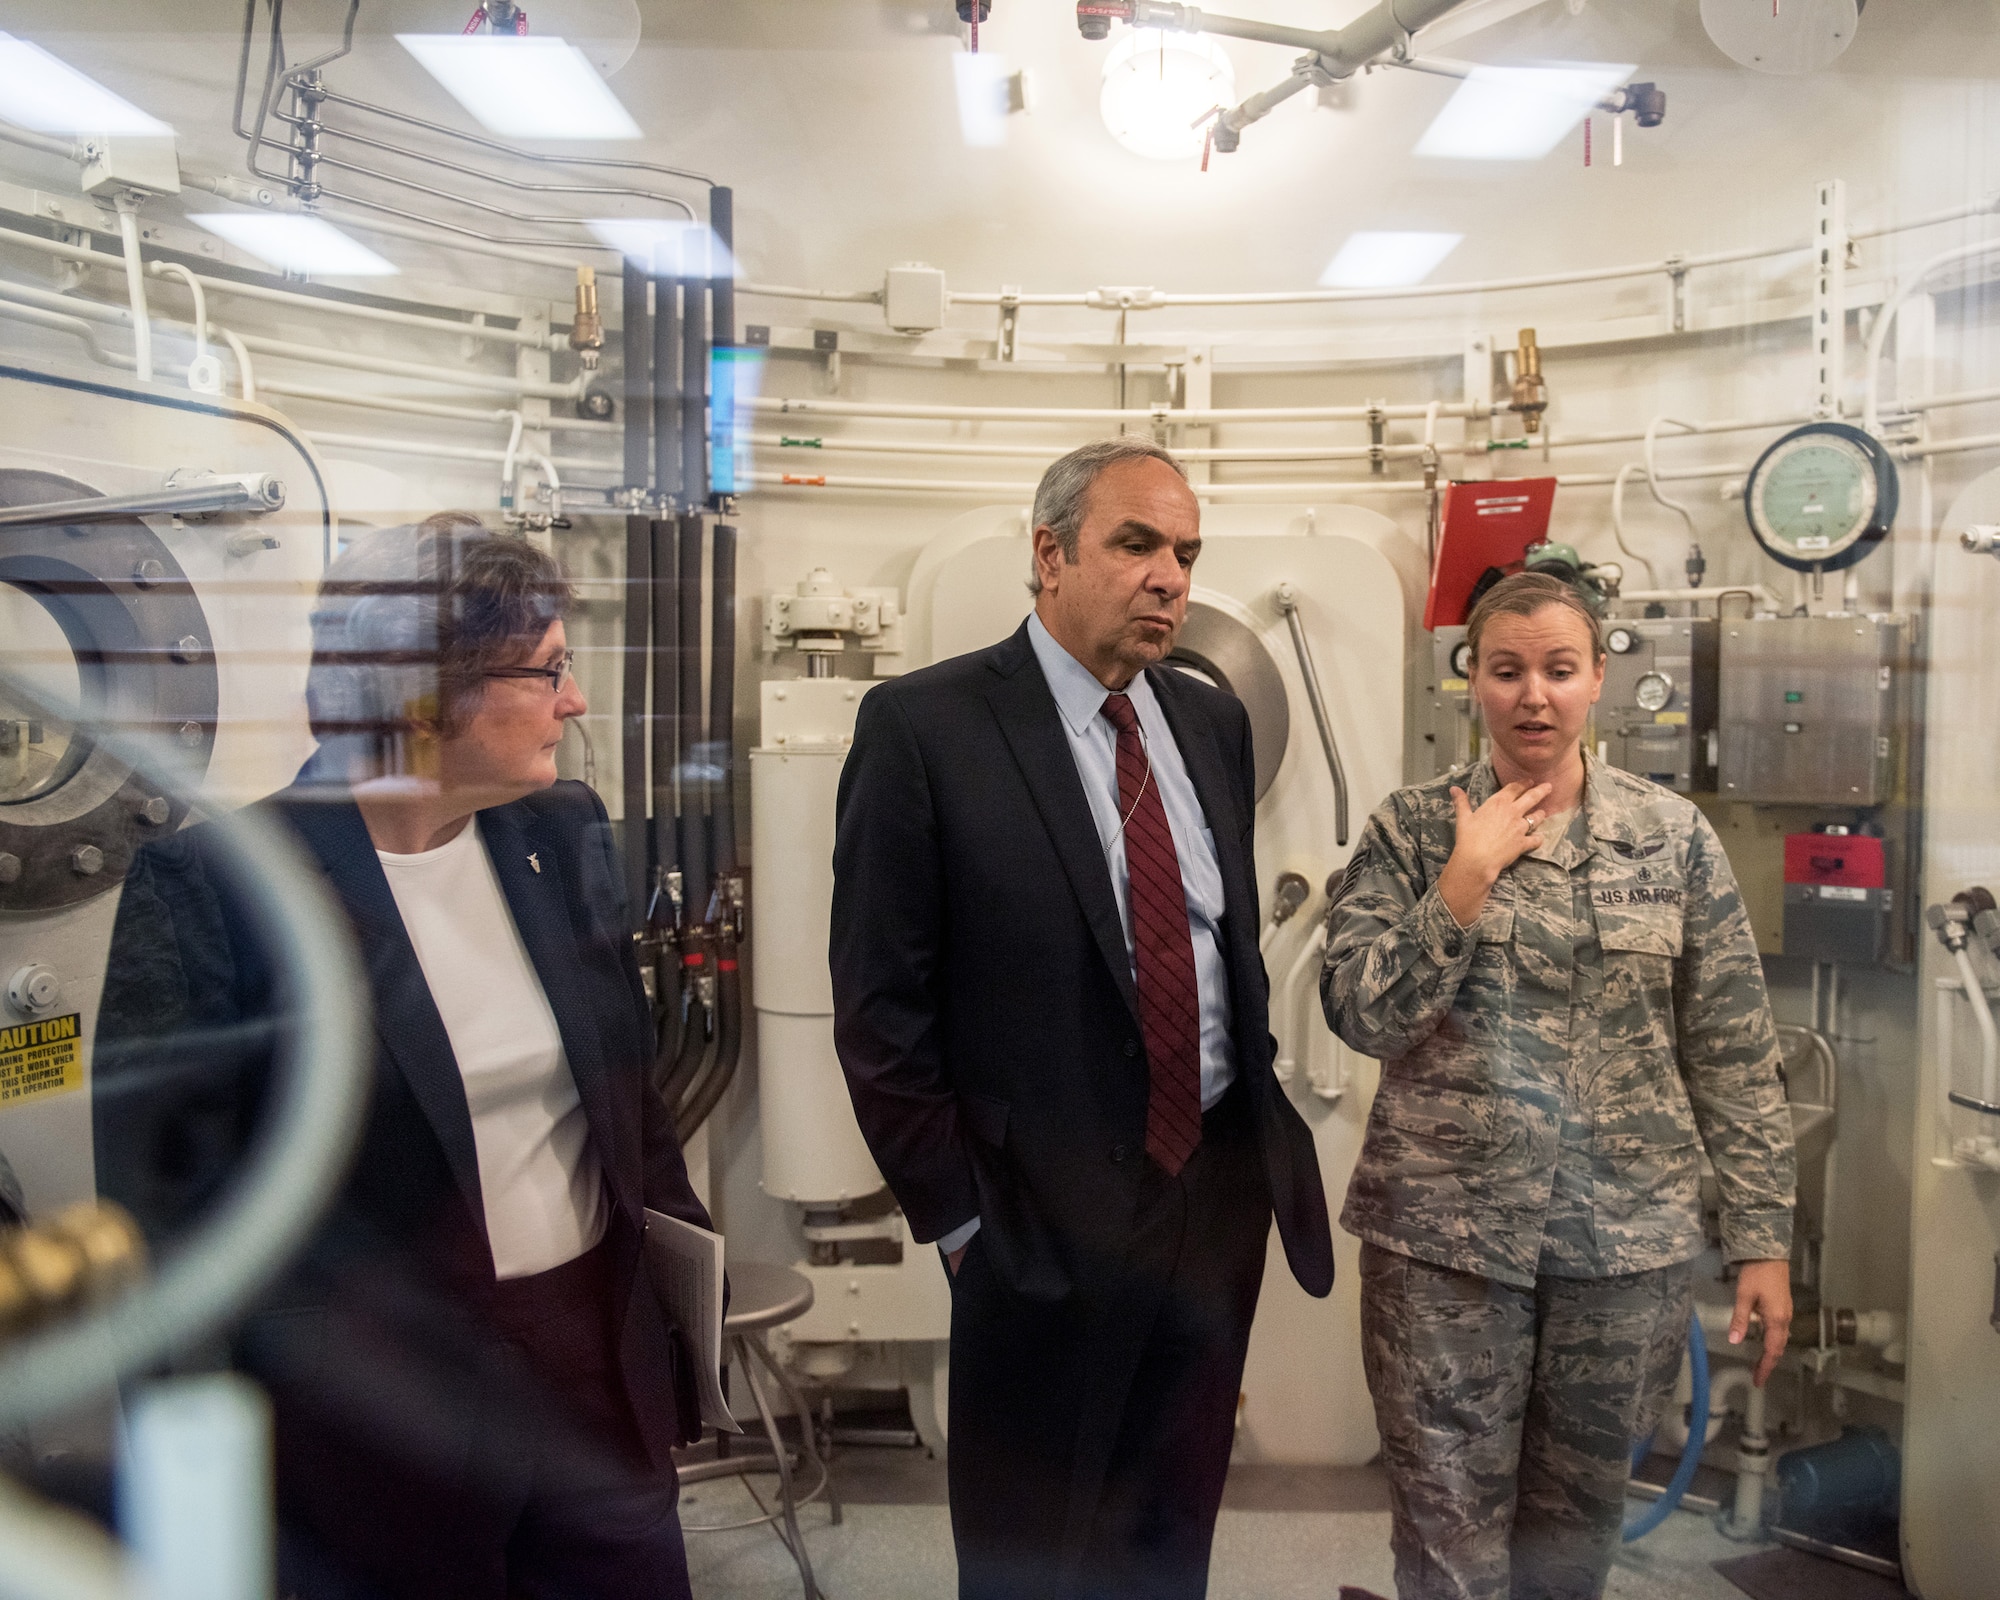 U.S. Air Force Tech. Sgt. Samantha Soran, right, 60th Medical Group, gives a briefing to Dr. Richard Joseph, Chief Scientist of the United States Air Force, Washington, D.C., during his visit to Travis Air Force Base, Calif., July 12, 2018. Joseph toured David Grant USAF Medical Center, Phoenix Spark lab and visited with Airmen. Joseph serves as the chief scientific adviser to the Chief of Staff and Secretary of the AF, and provides assessments on a wide range of scientific and technical issues affecting the AF mission. (U.S. Air Force photo by Louis Briscese)